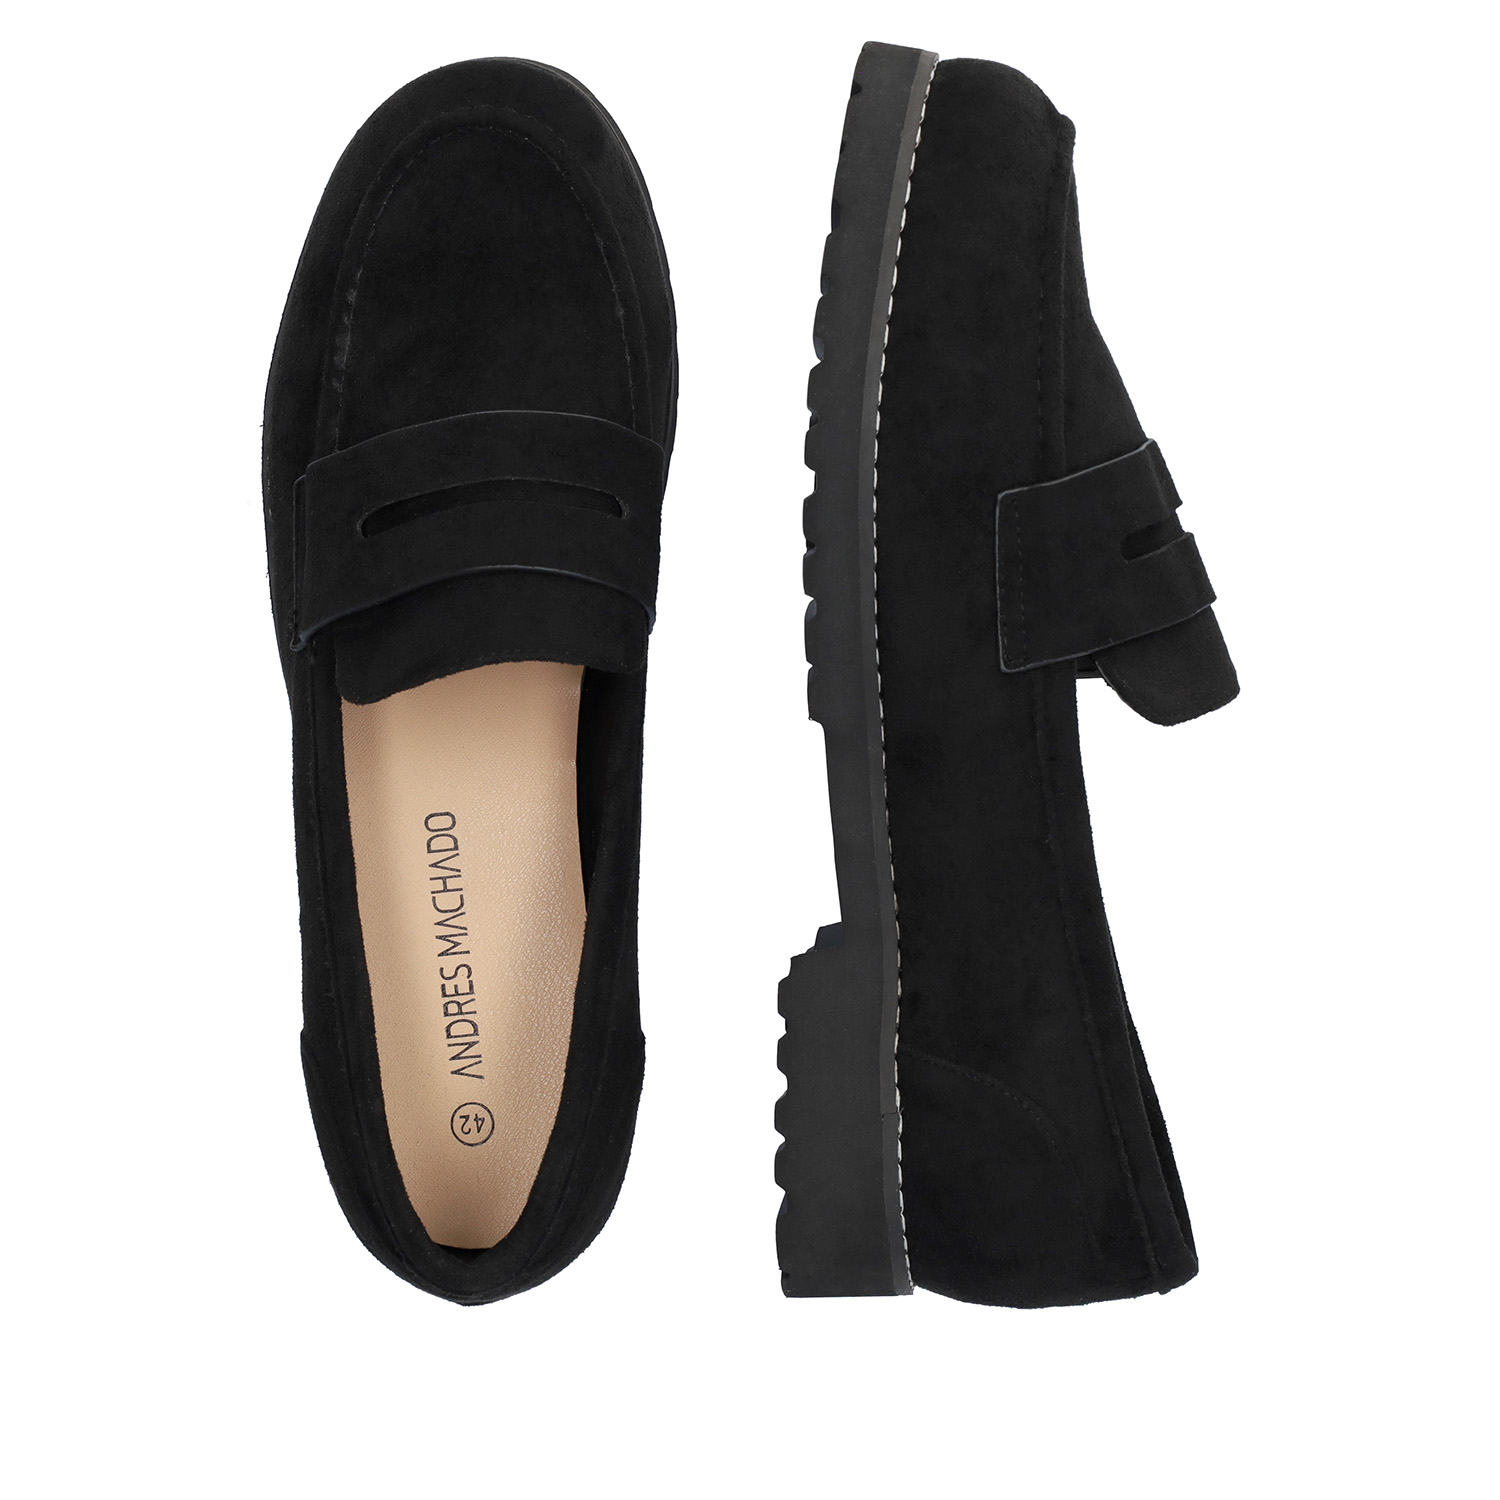 Moccasins in black faux suede and track sole 